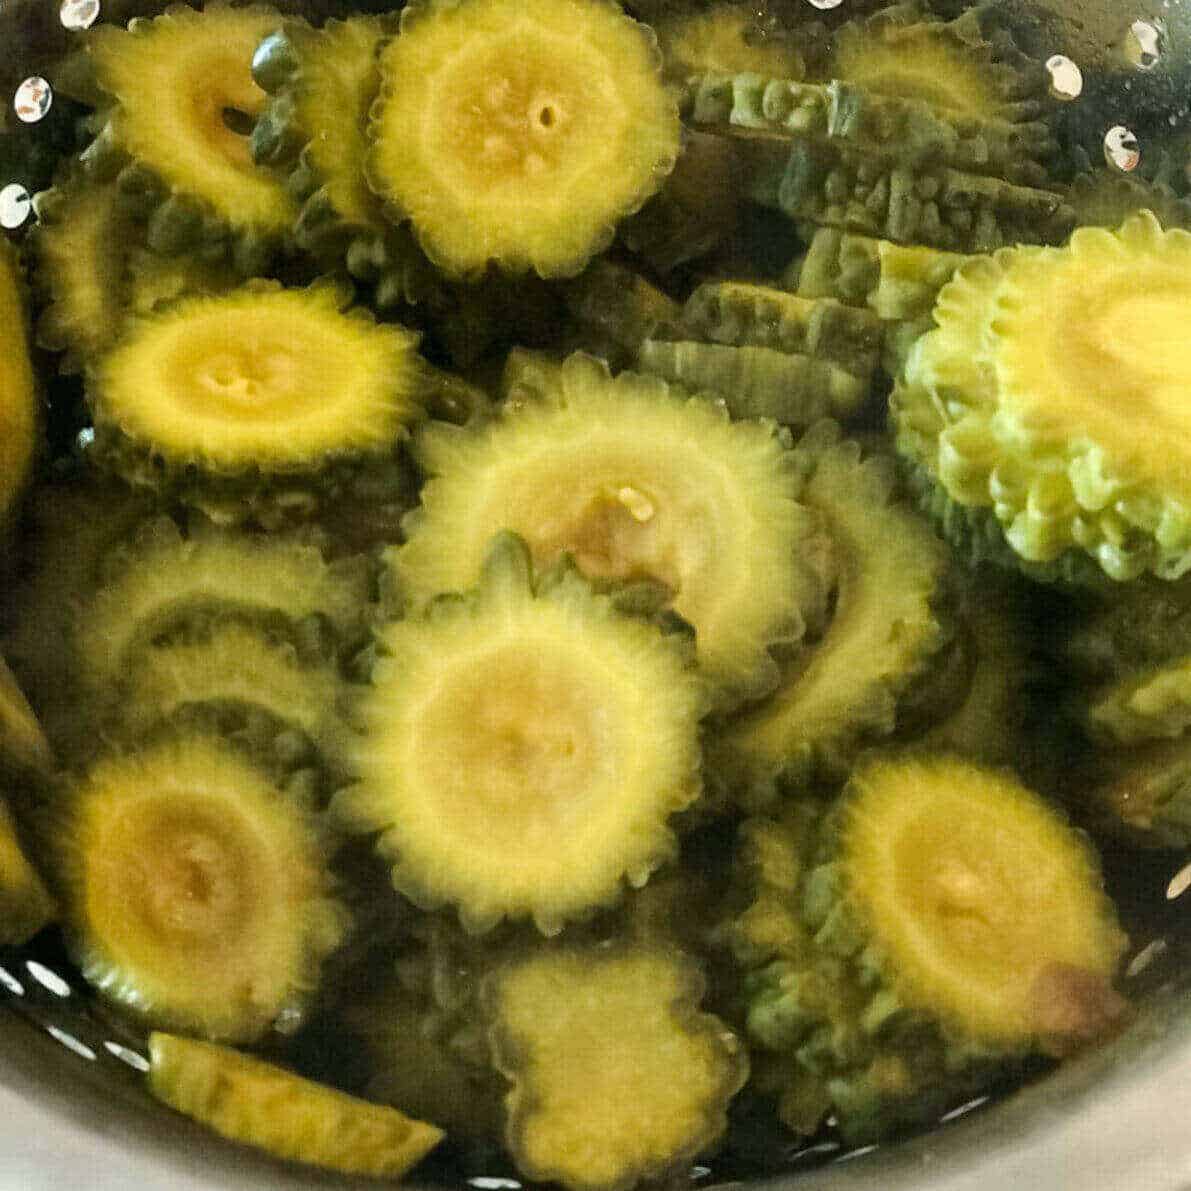 Boiled bitter melon slices placed in a sieved colander.